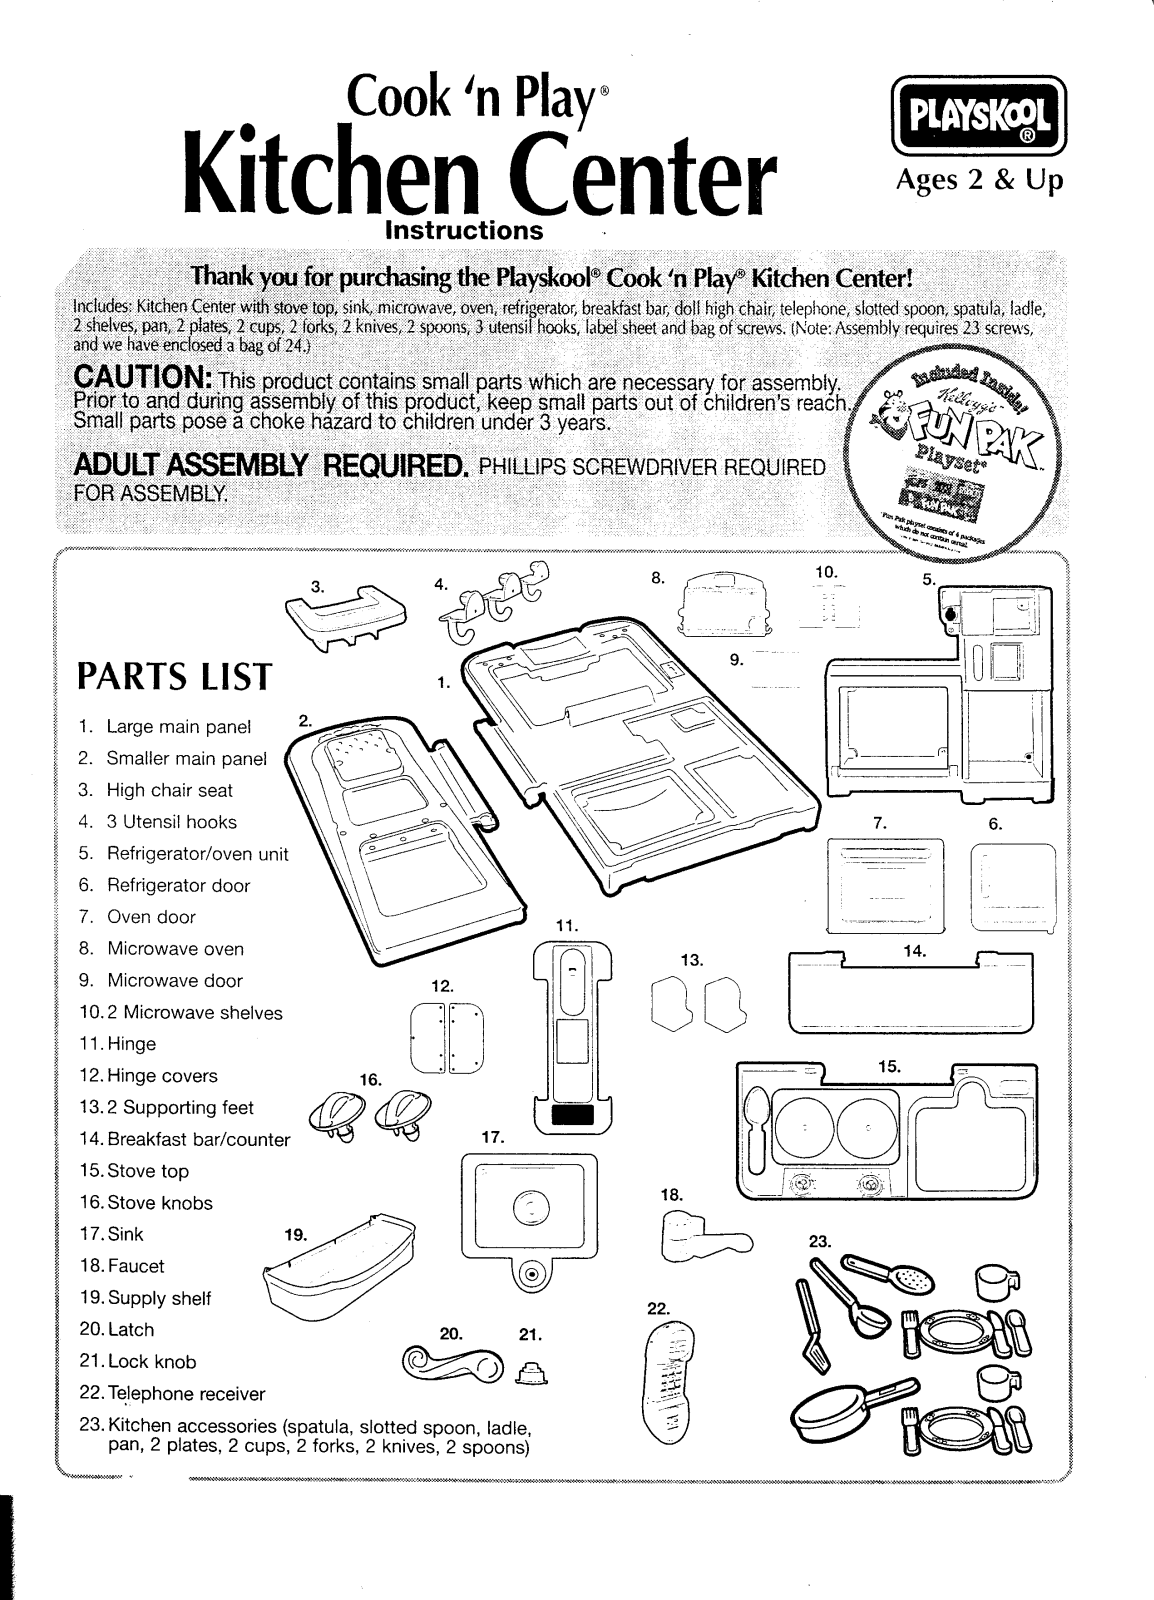 HASBRO Cook 'n Play Kitchen Center User Manual